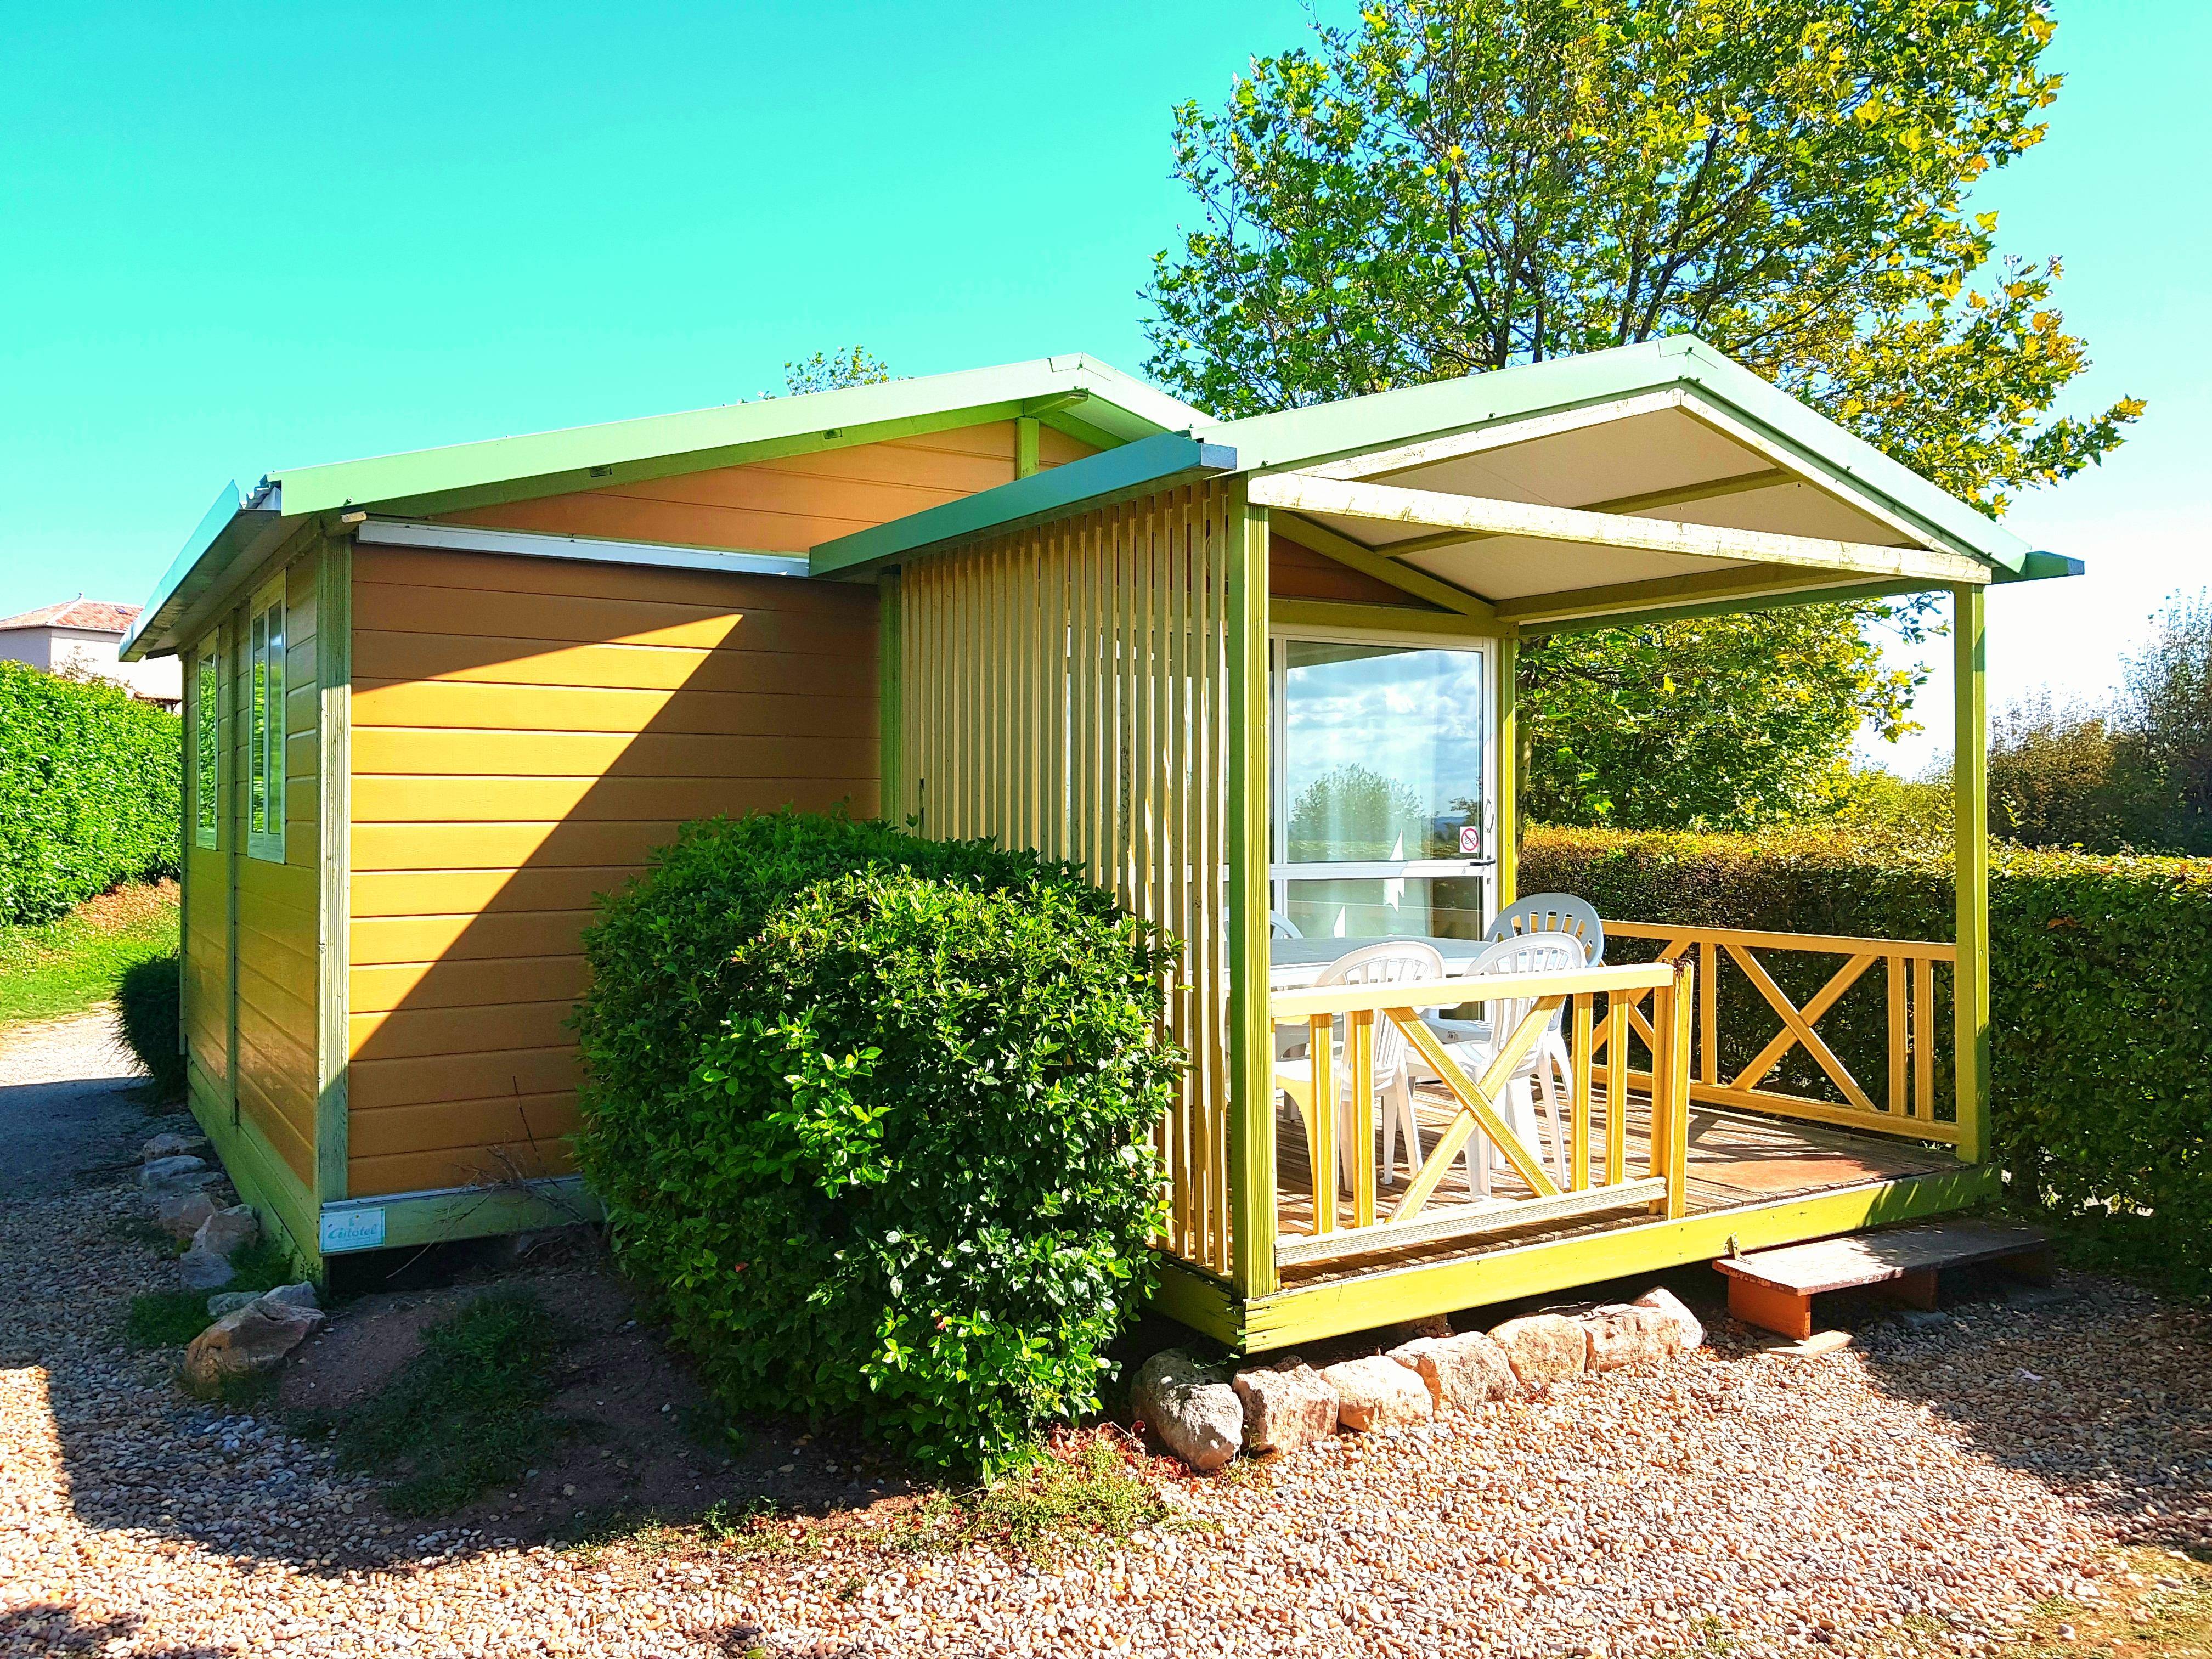 Accommodation - Chalet 25M² / 2 Bedrooms - Sheltered Terrace - Camping La Grappe Fleurie